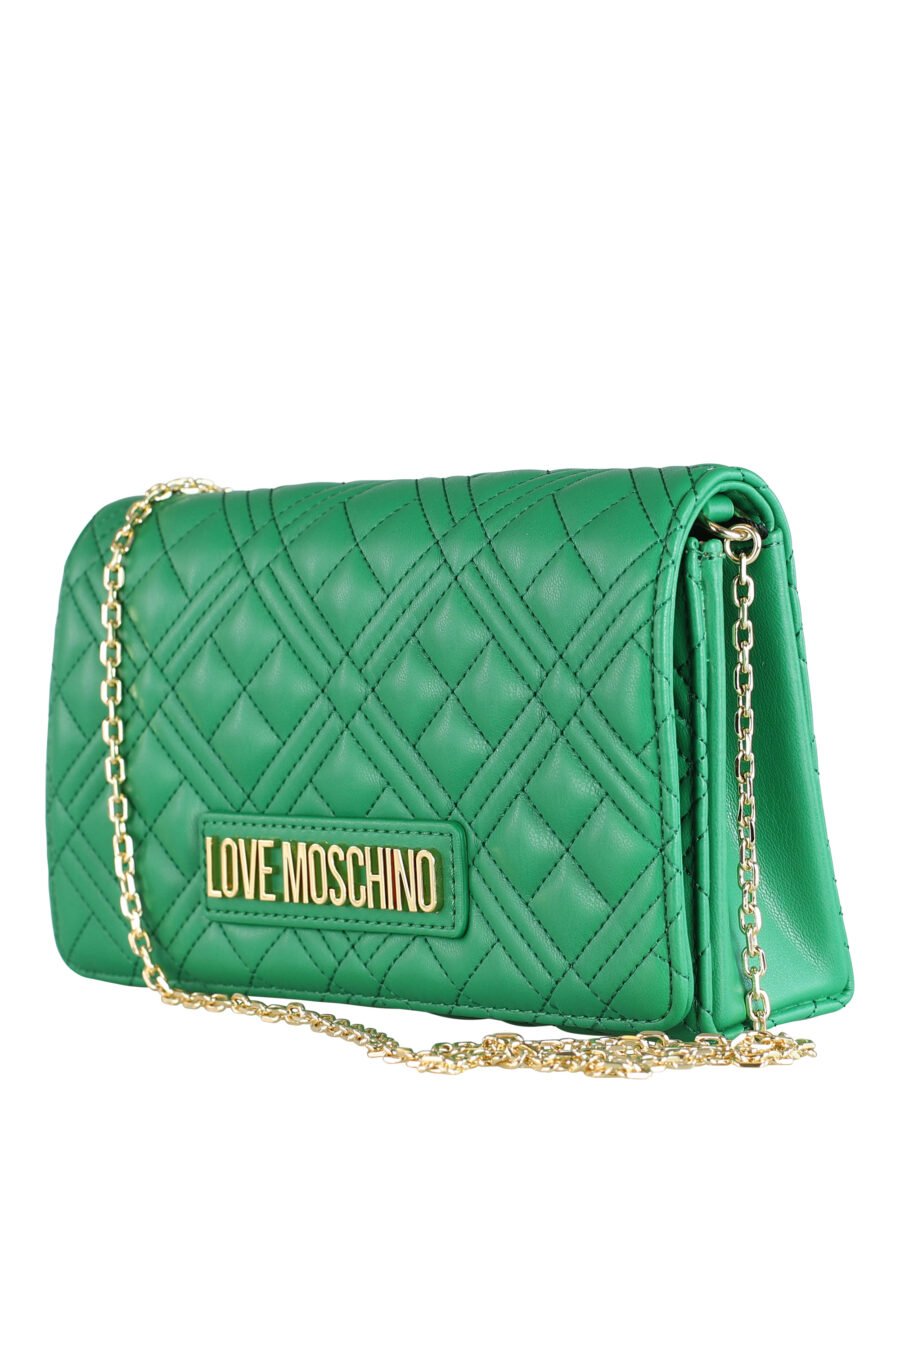 Green quilted shoulder bag with chain and "lettering" logo - IMG 0418